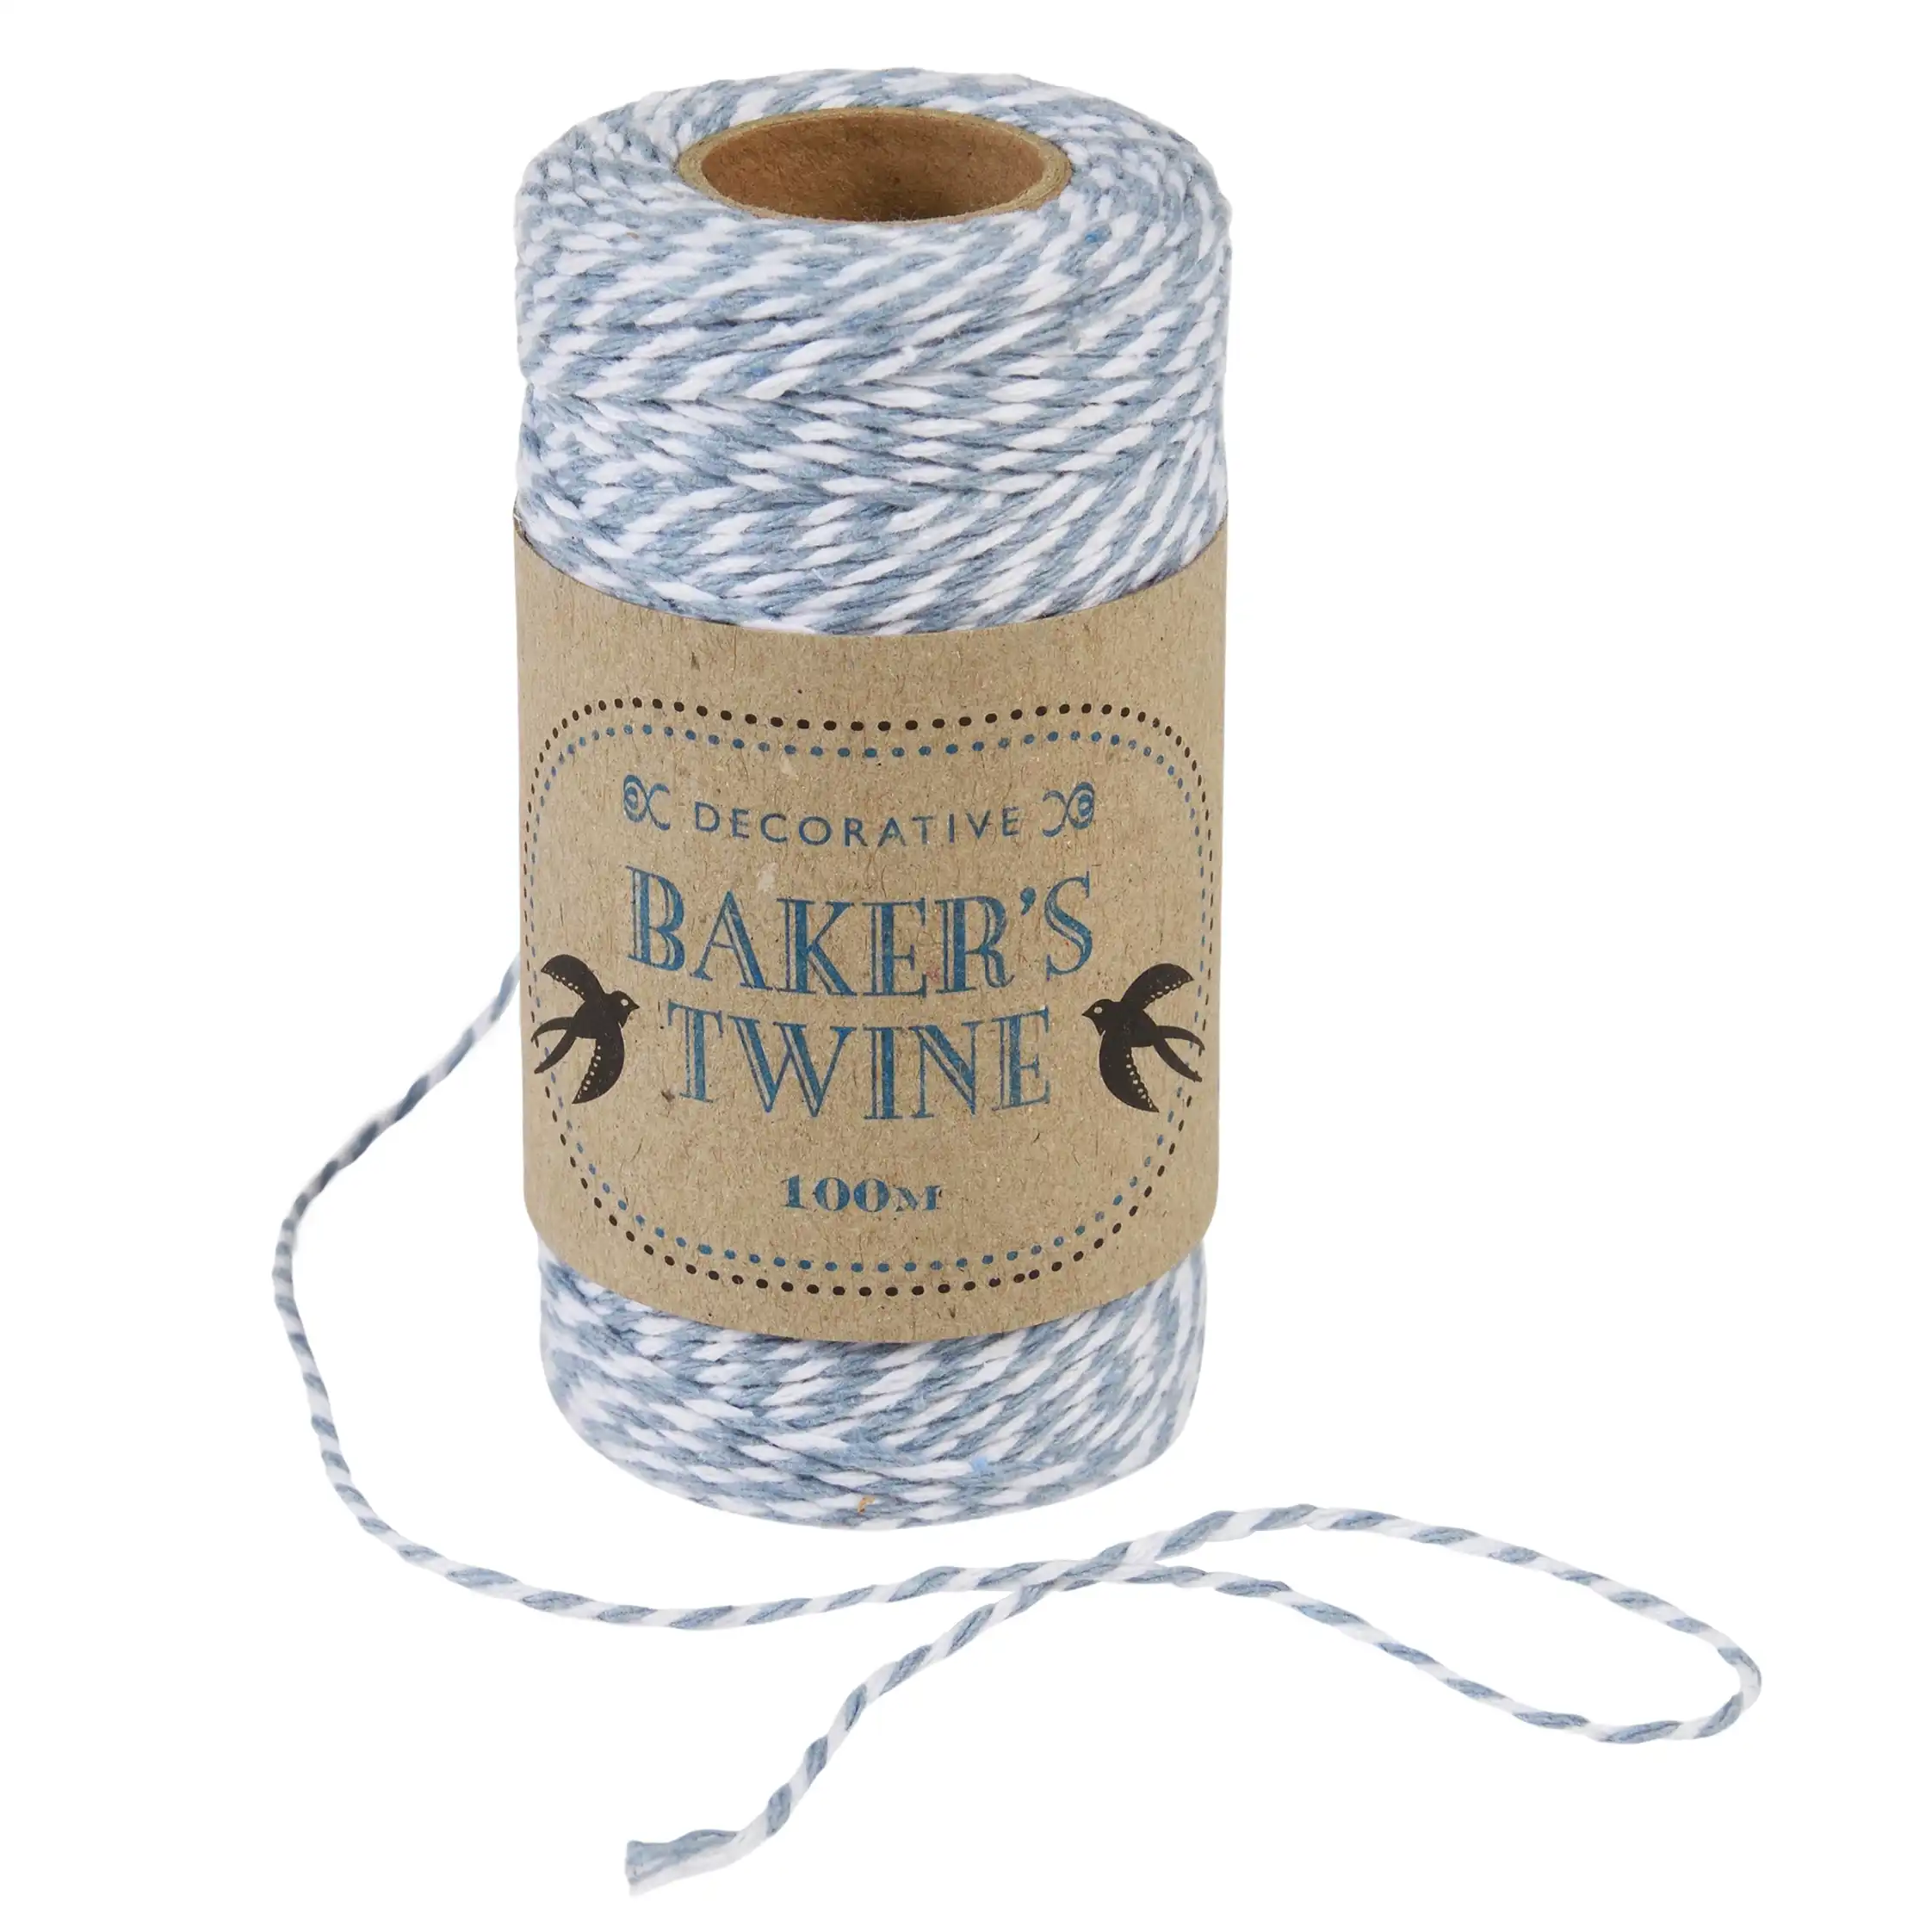 roll of twine (100m) - blue and white